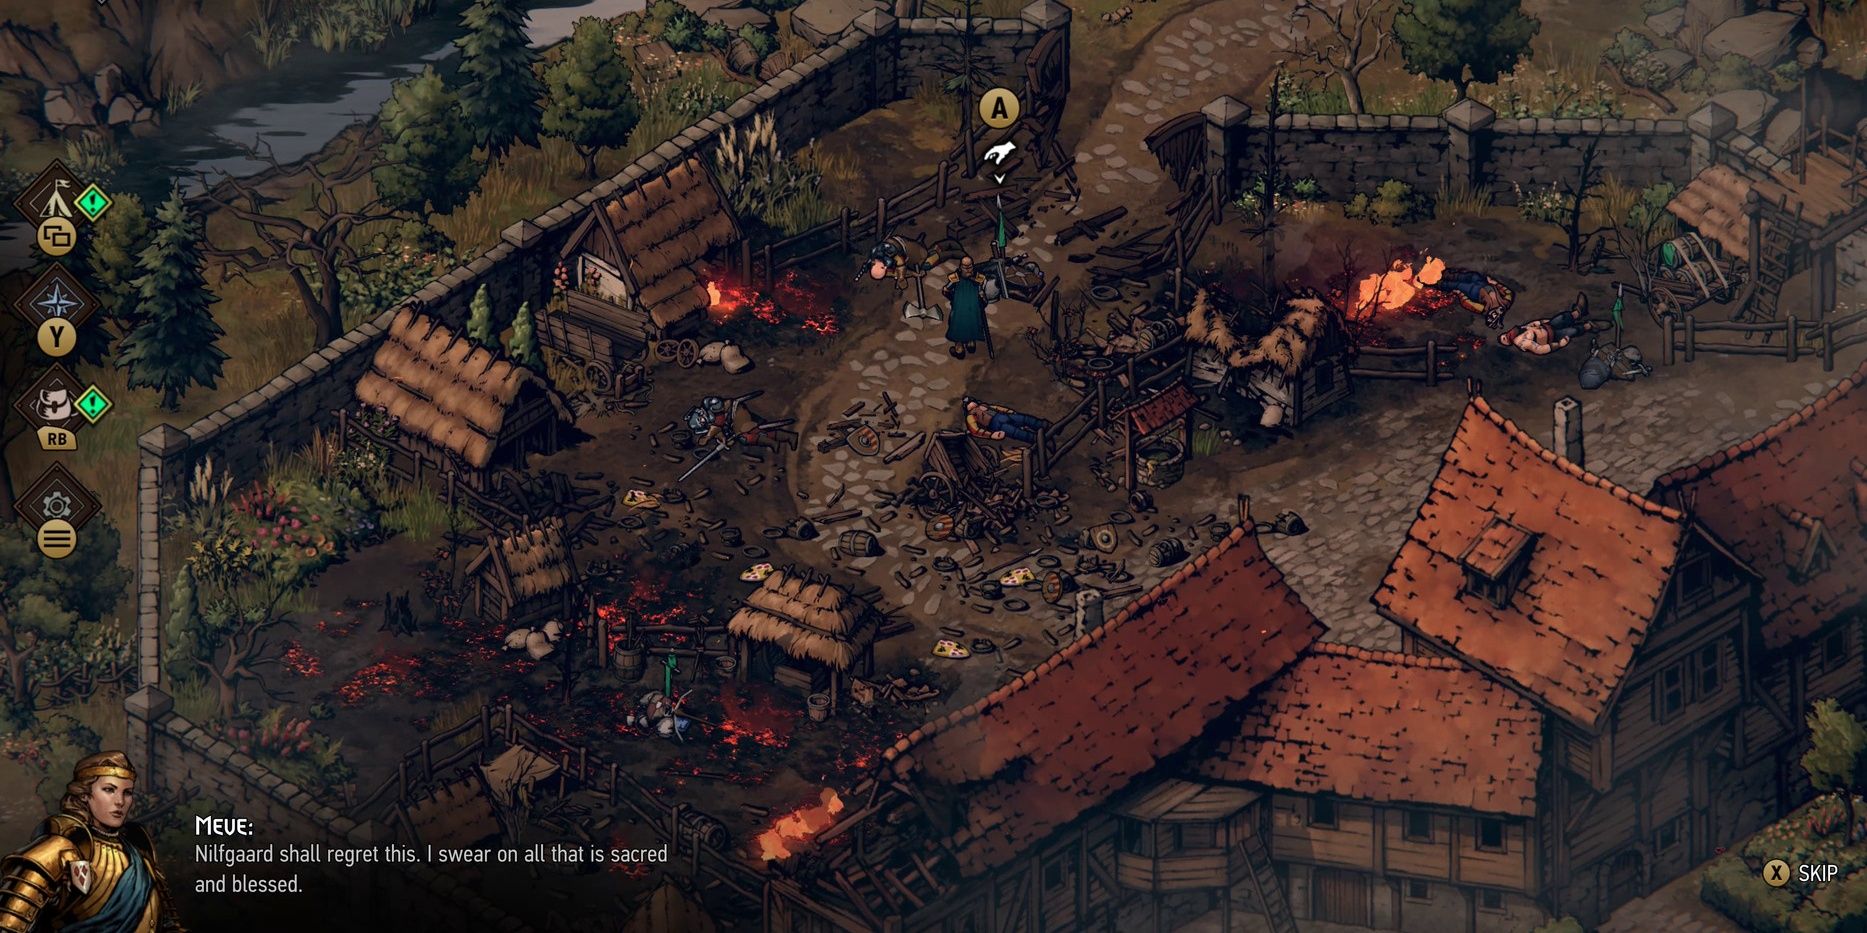 Gameplay of "A Bitter Return" in Thronebreaker: The Witcher Tales